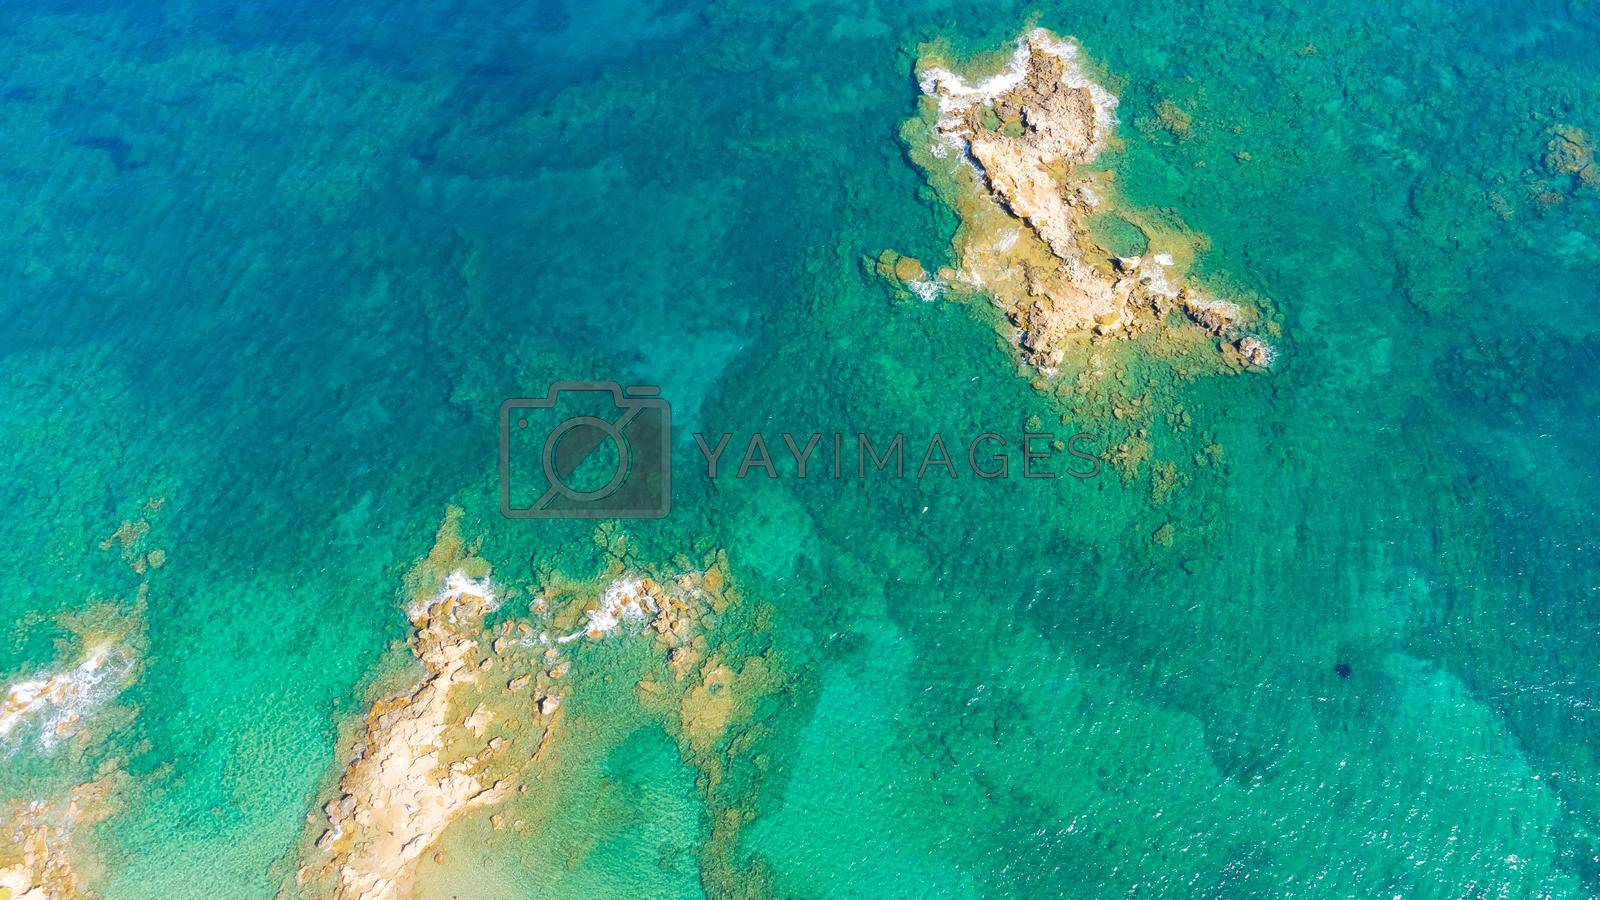 Royalty free image of A small island View from above coast taken by a drone. by Andelov13